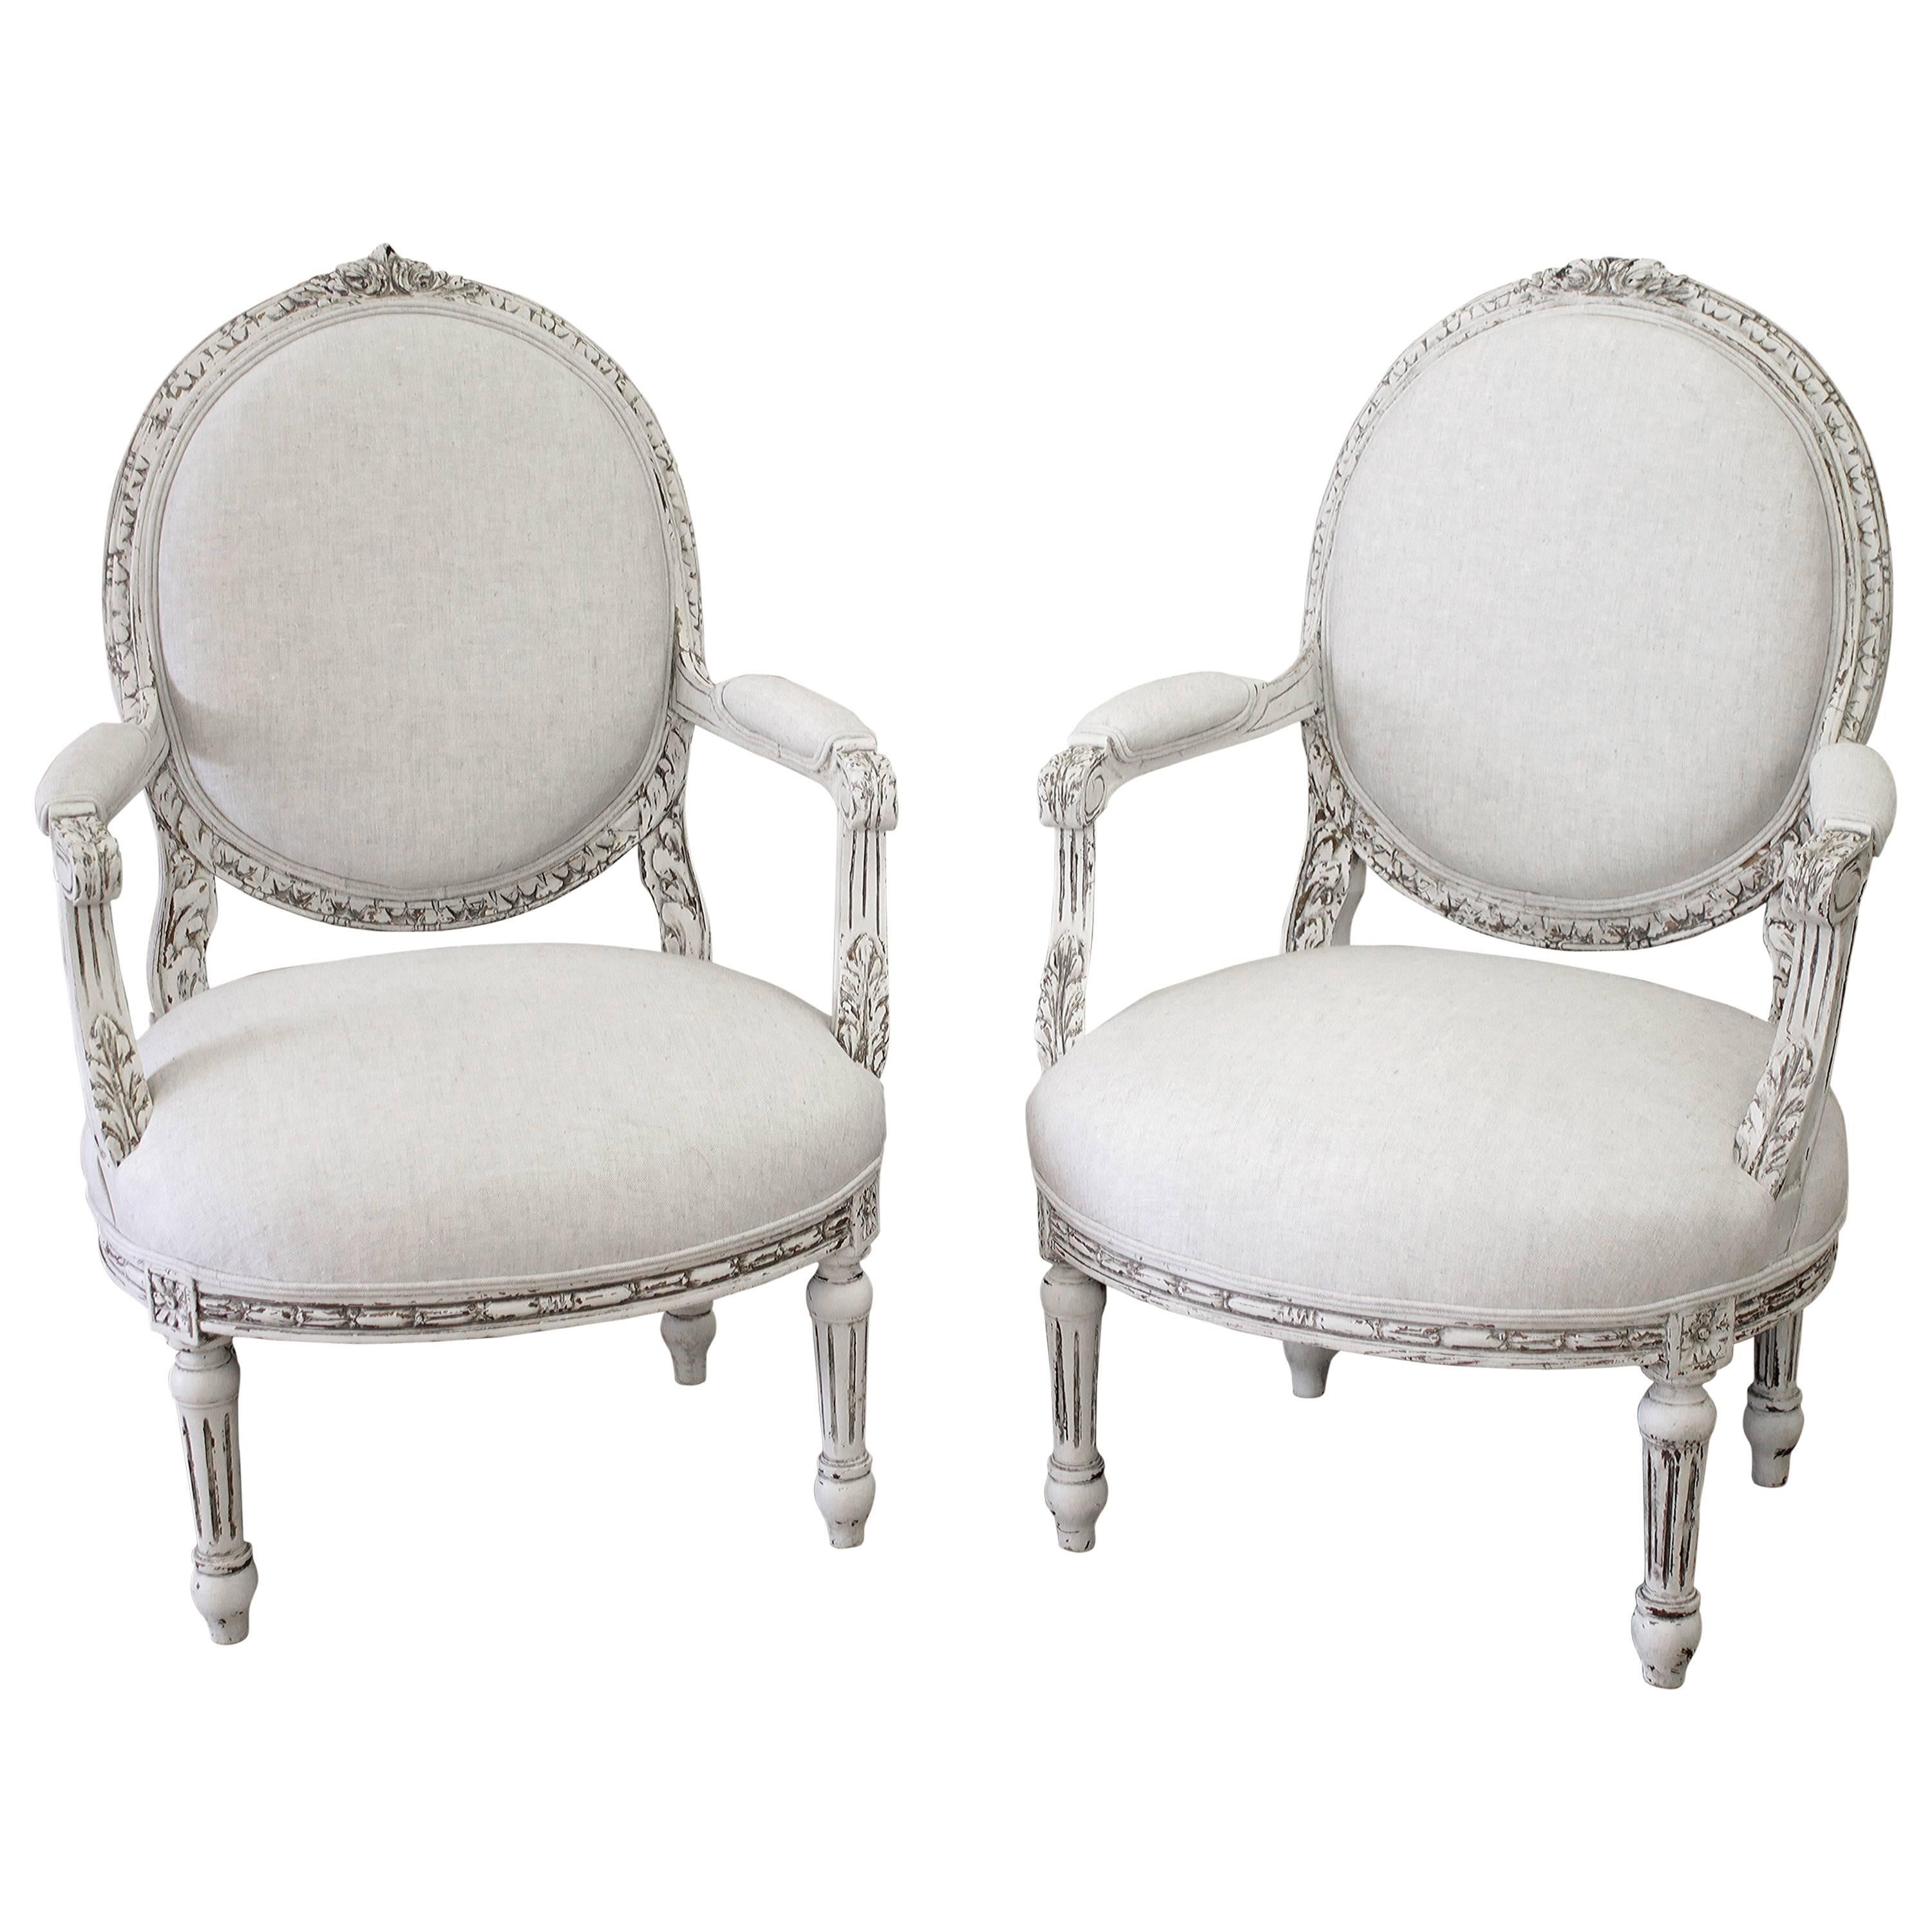 Pair of Painted French Louis XVI Style Fauteuils